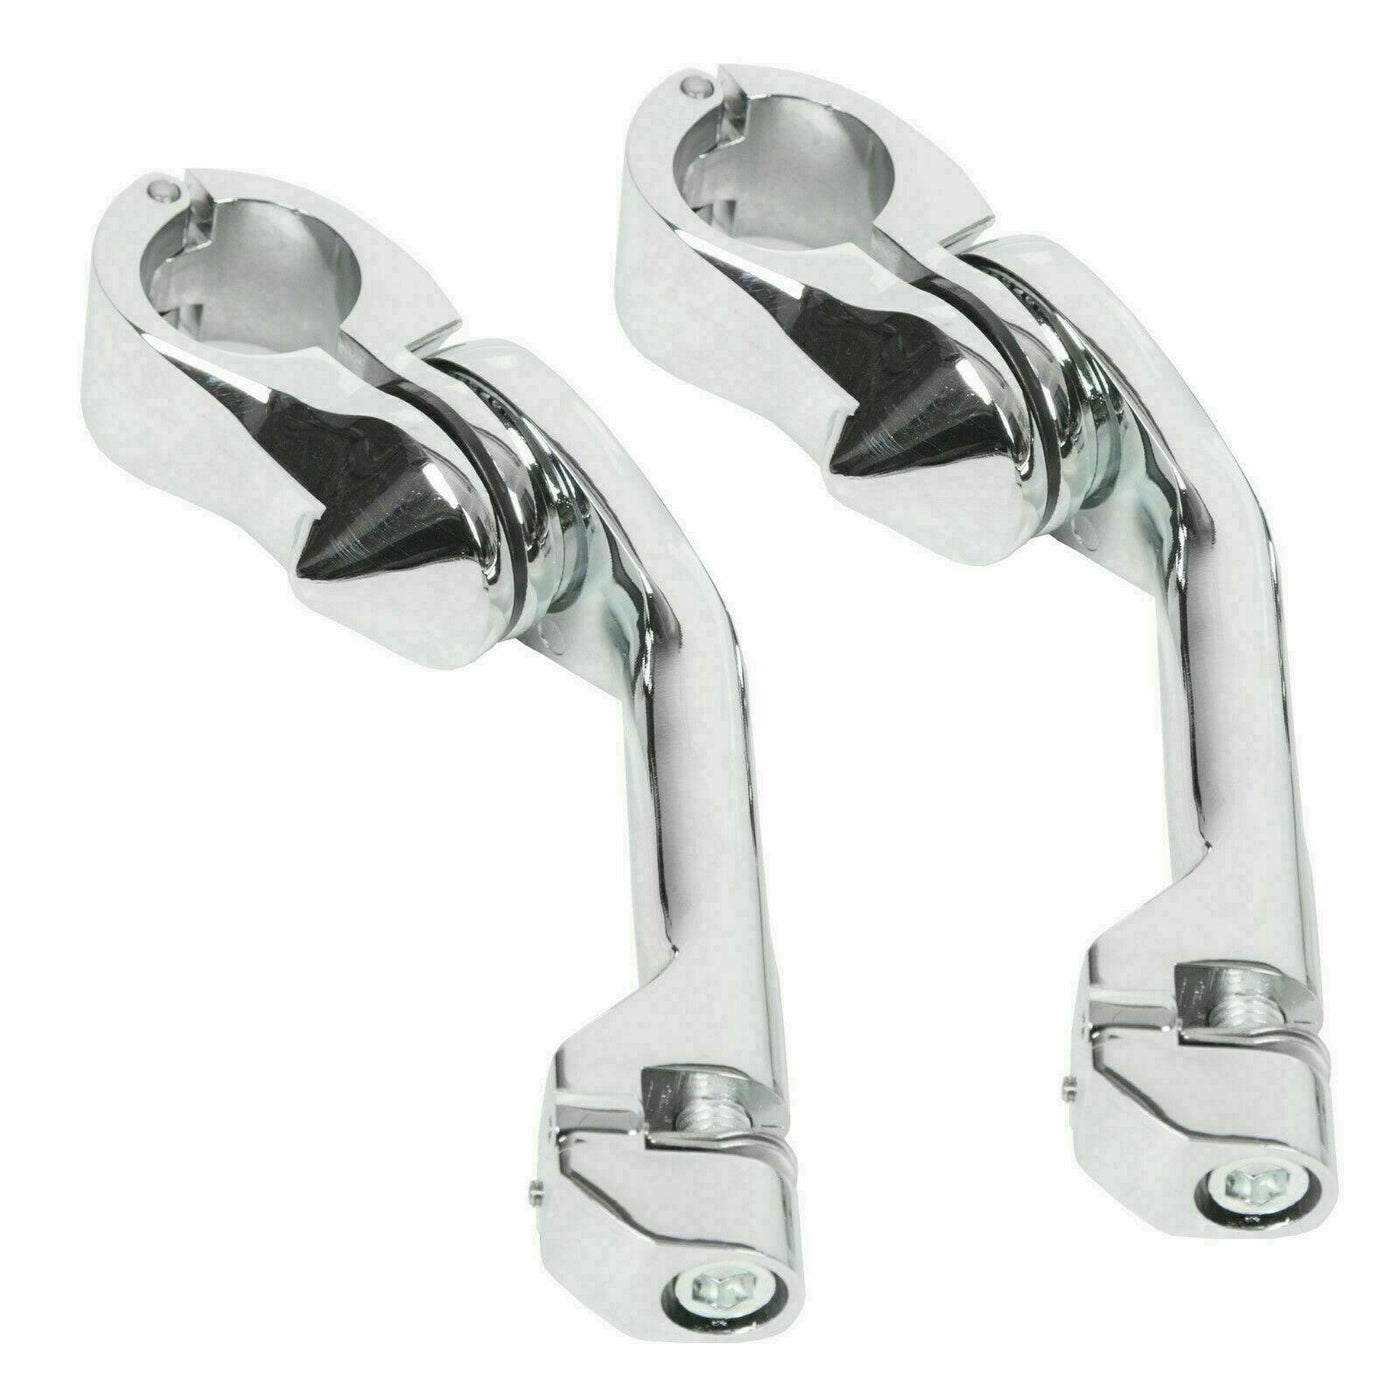 Chrome Long Highway Foot Pegs 1-1/4" Crash Bar For Harley Street Glide Road King - Moto Life Products